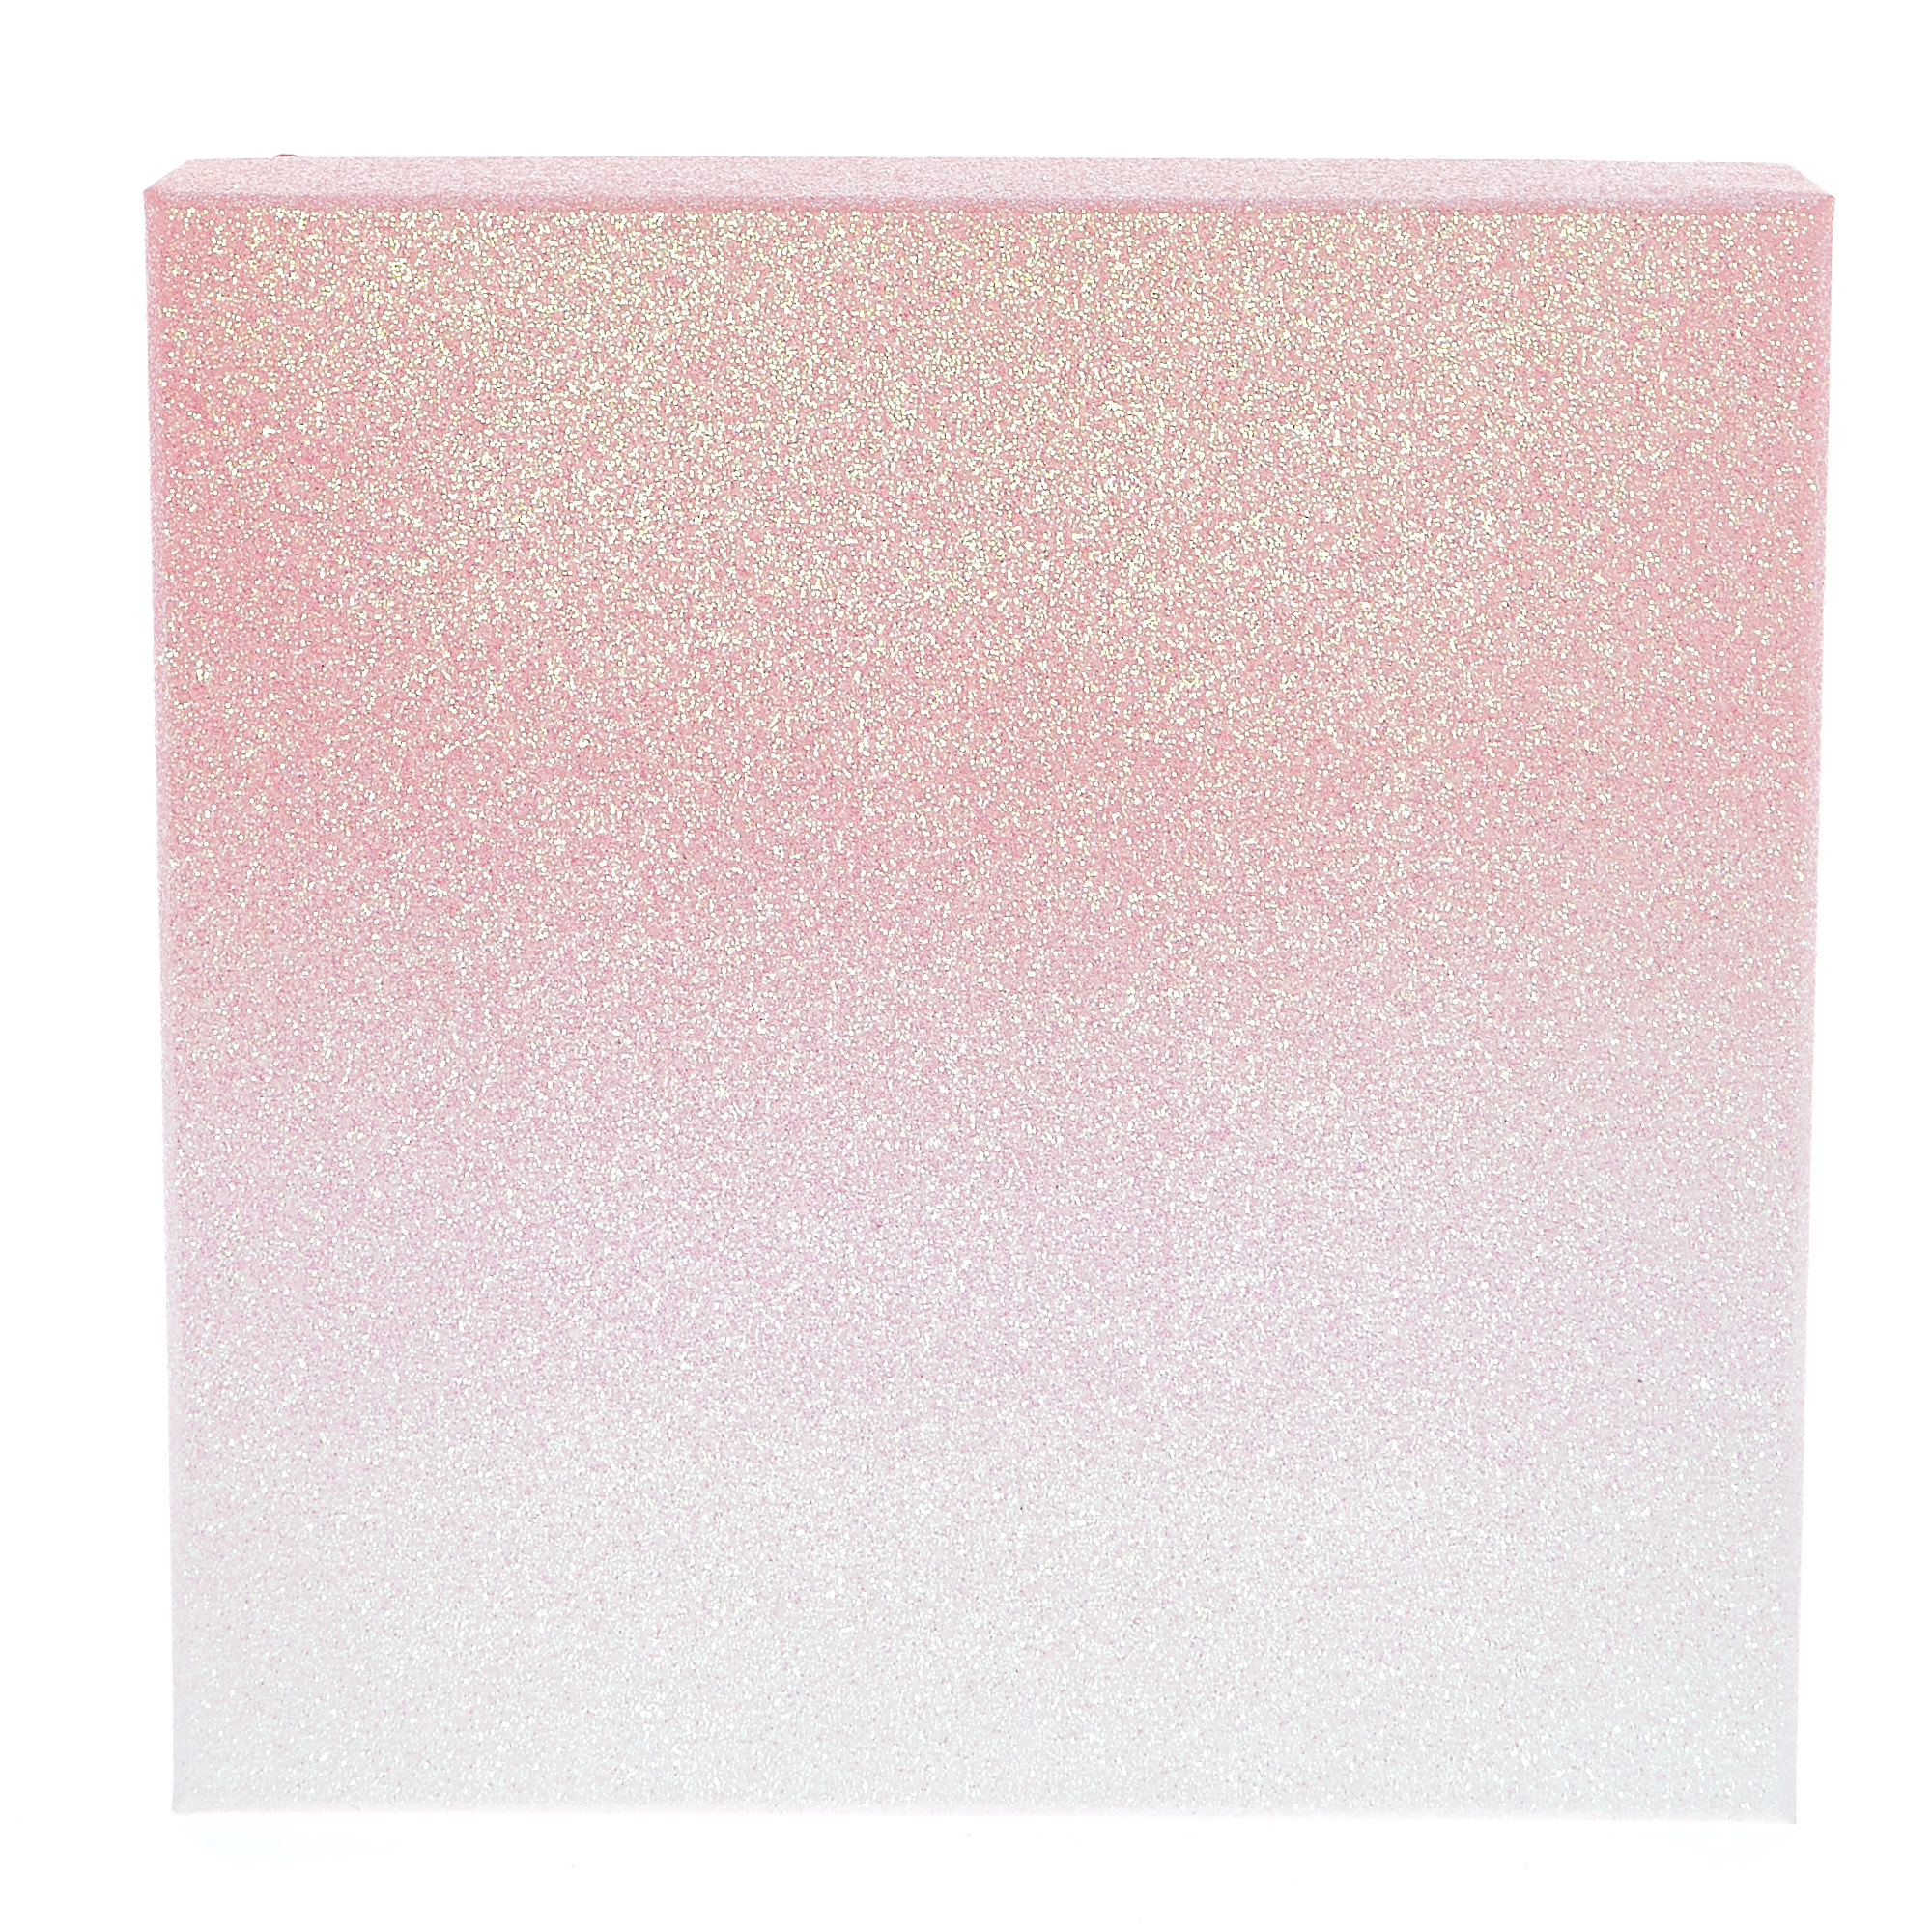 Pink Glitter Ombre Gift Boxes - Set Of 2 